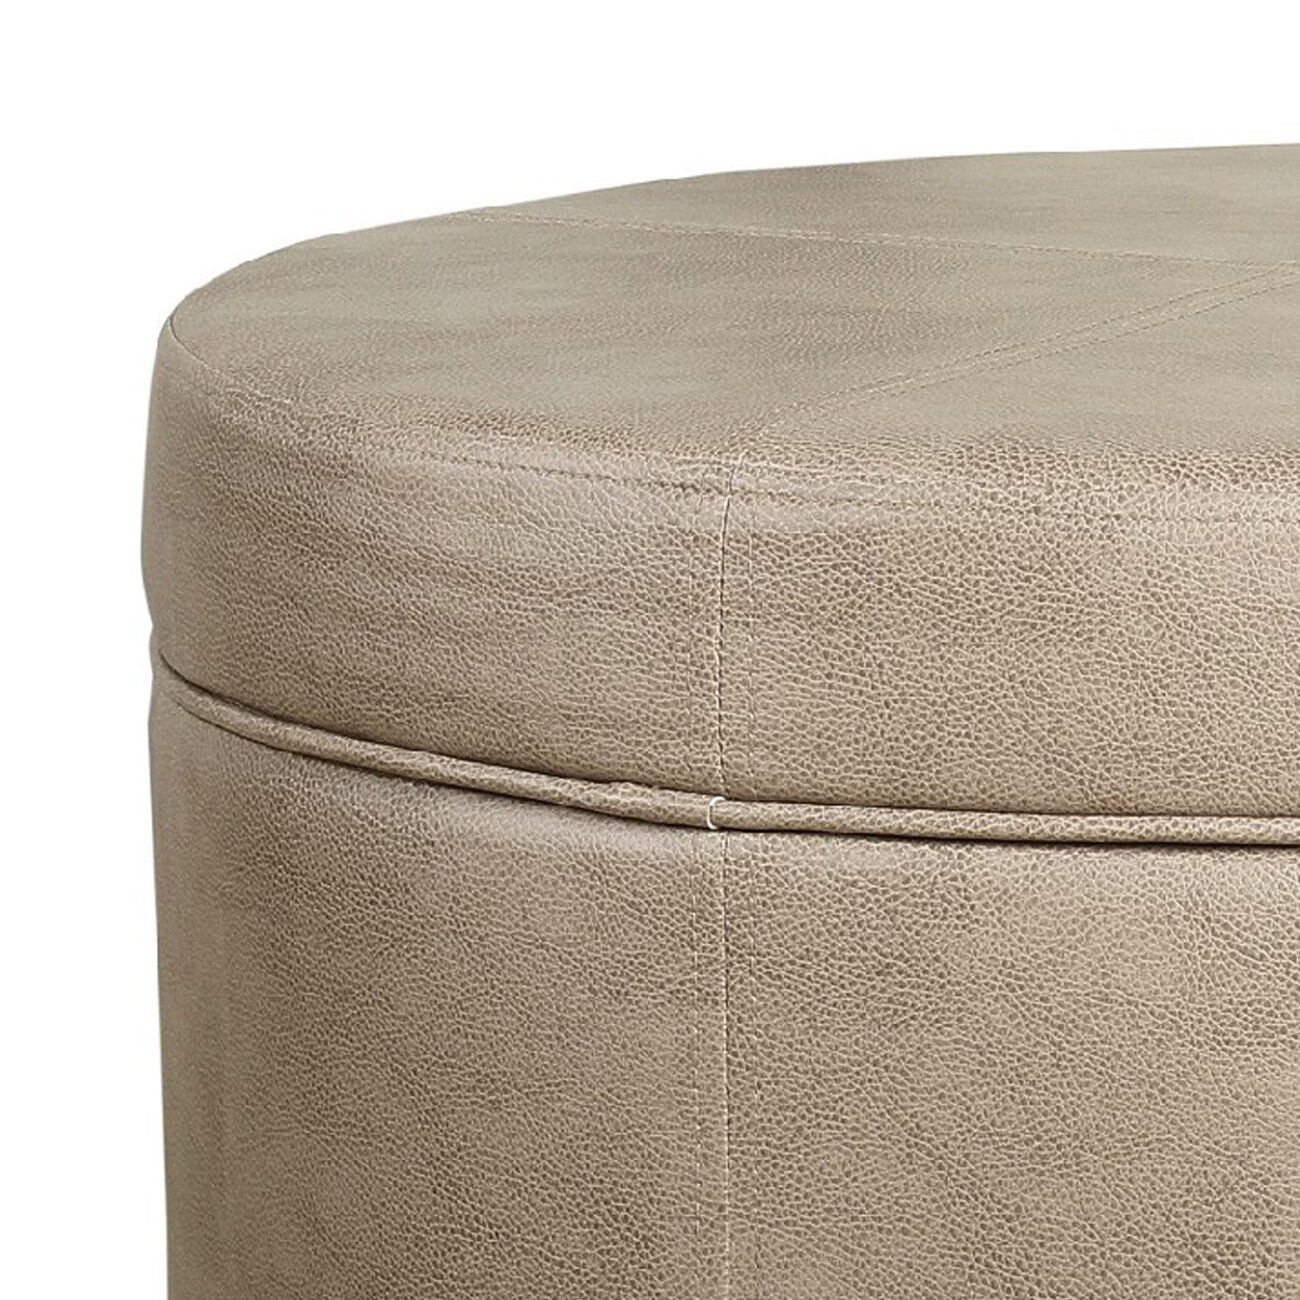 Faux Leather Upholstered Wooden Ottoman with Lift Off Lid Storage, Brown